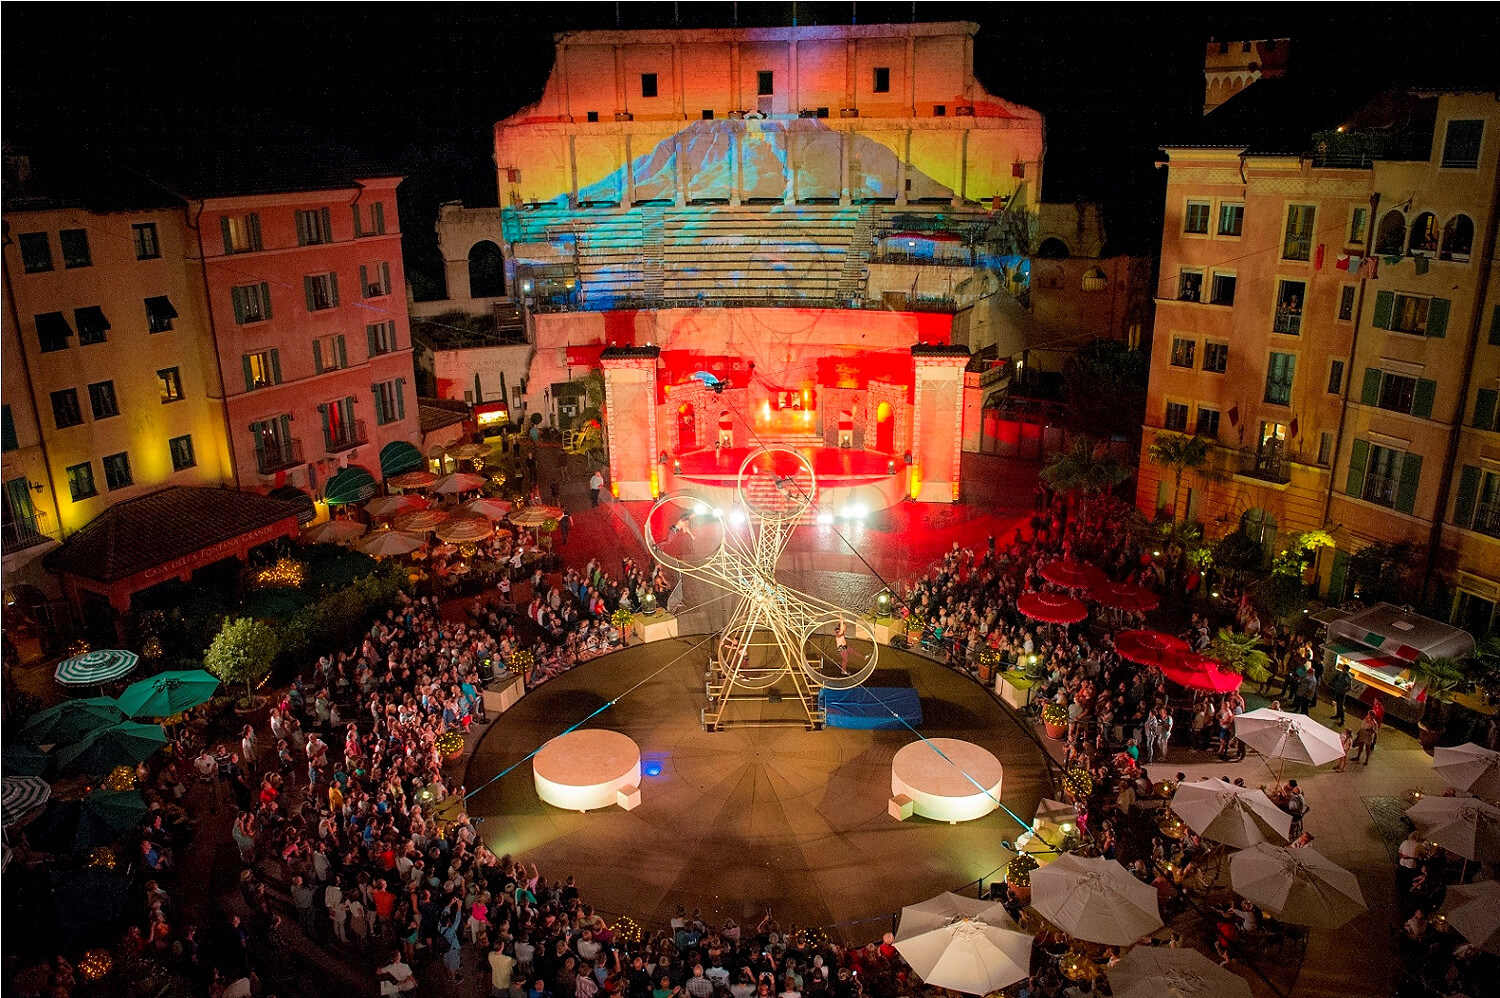 Sommershow "Imperio" im Europa-Park Hotel Colosseo